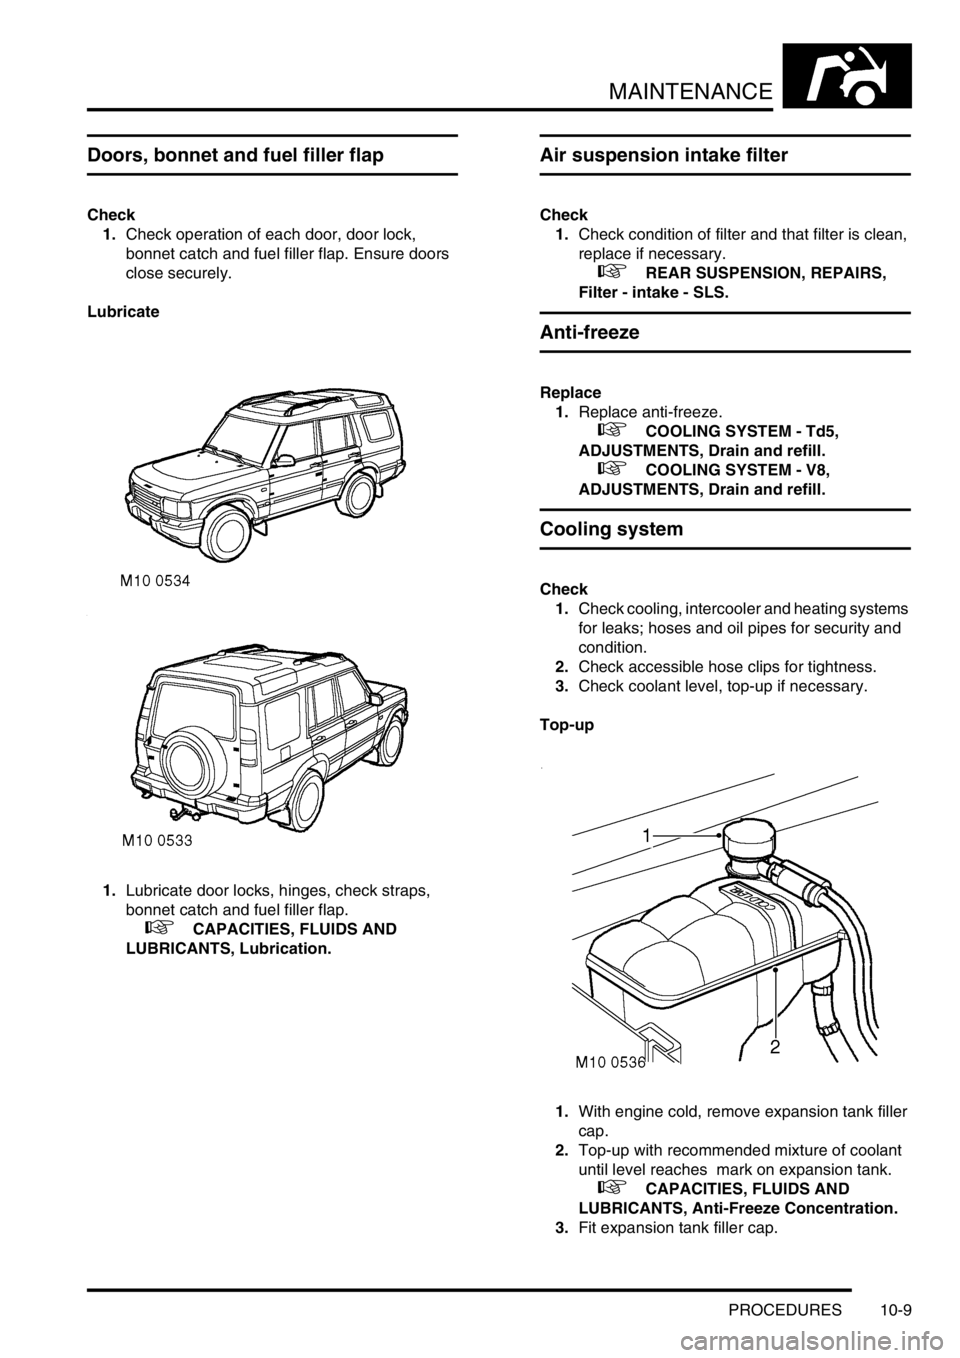 LAND ROVER DISCOVERY 2002  Workshop Manual MAINTENANCE
PROCEDURES 10-9
Doors, bonnet and fuel filler flap
Check
1.Check operation of each door, door lock, 
bonnet catch and fuel filler flap. Ensure doors 
close securely.
Lubricate
1.Lubricate 